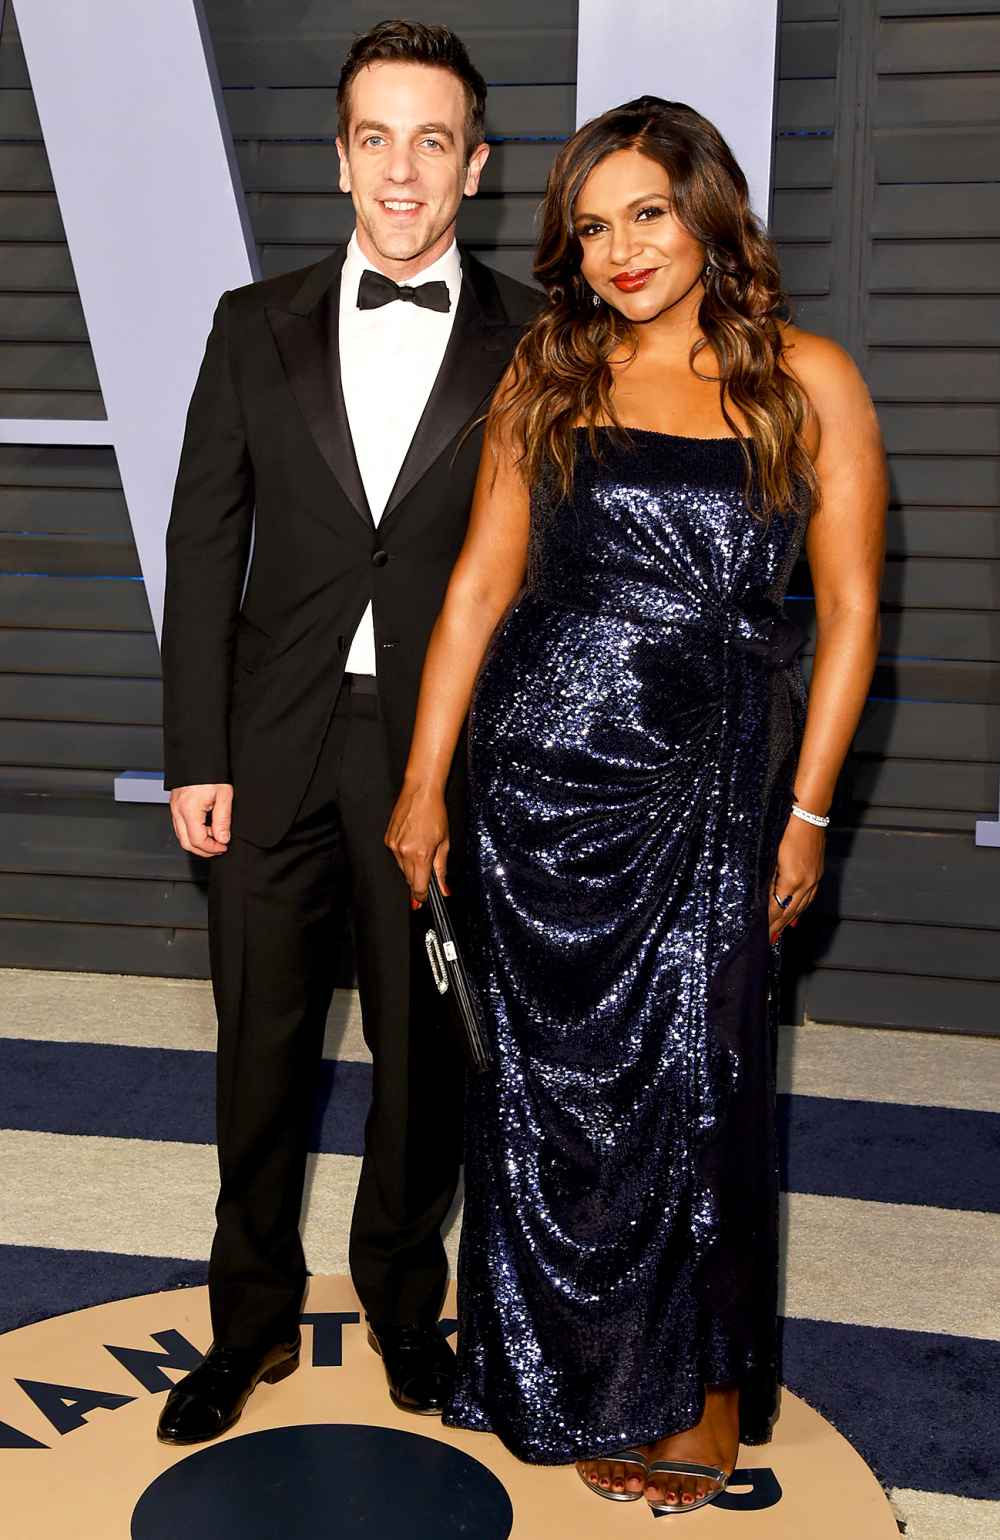 B.J. Novak and Mindy Kaling attend the 2018 Vanity Fair Oscar Party hosted by Radhika Jones at the Wallis Annenberg Center for the Performing Arts on March 4, 2018 in Beverly Hills, California.